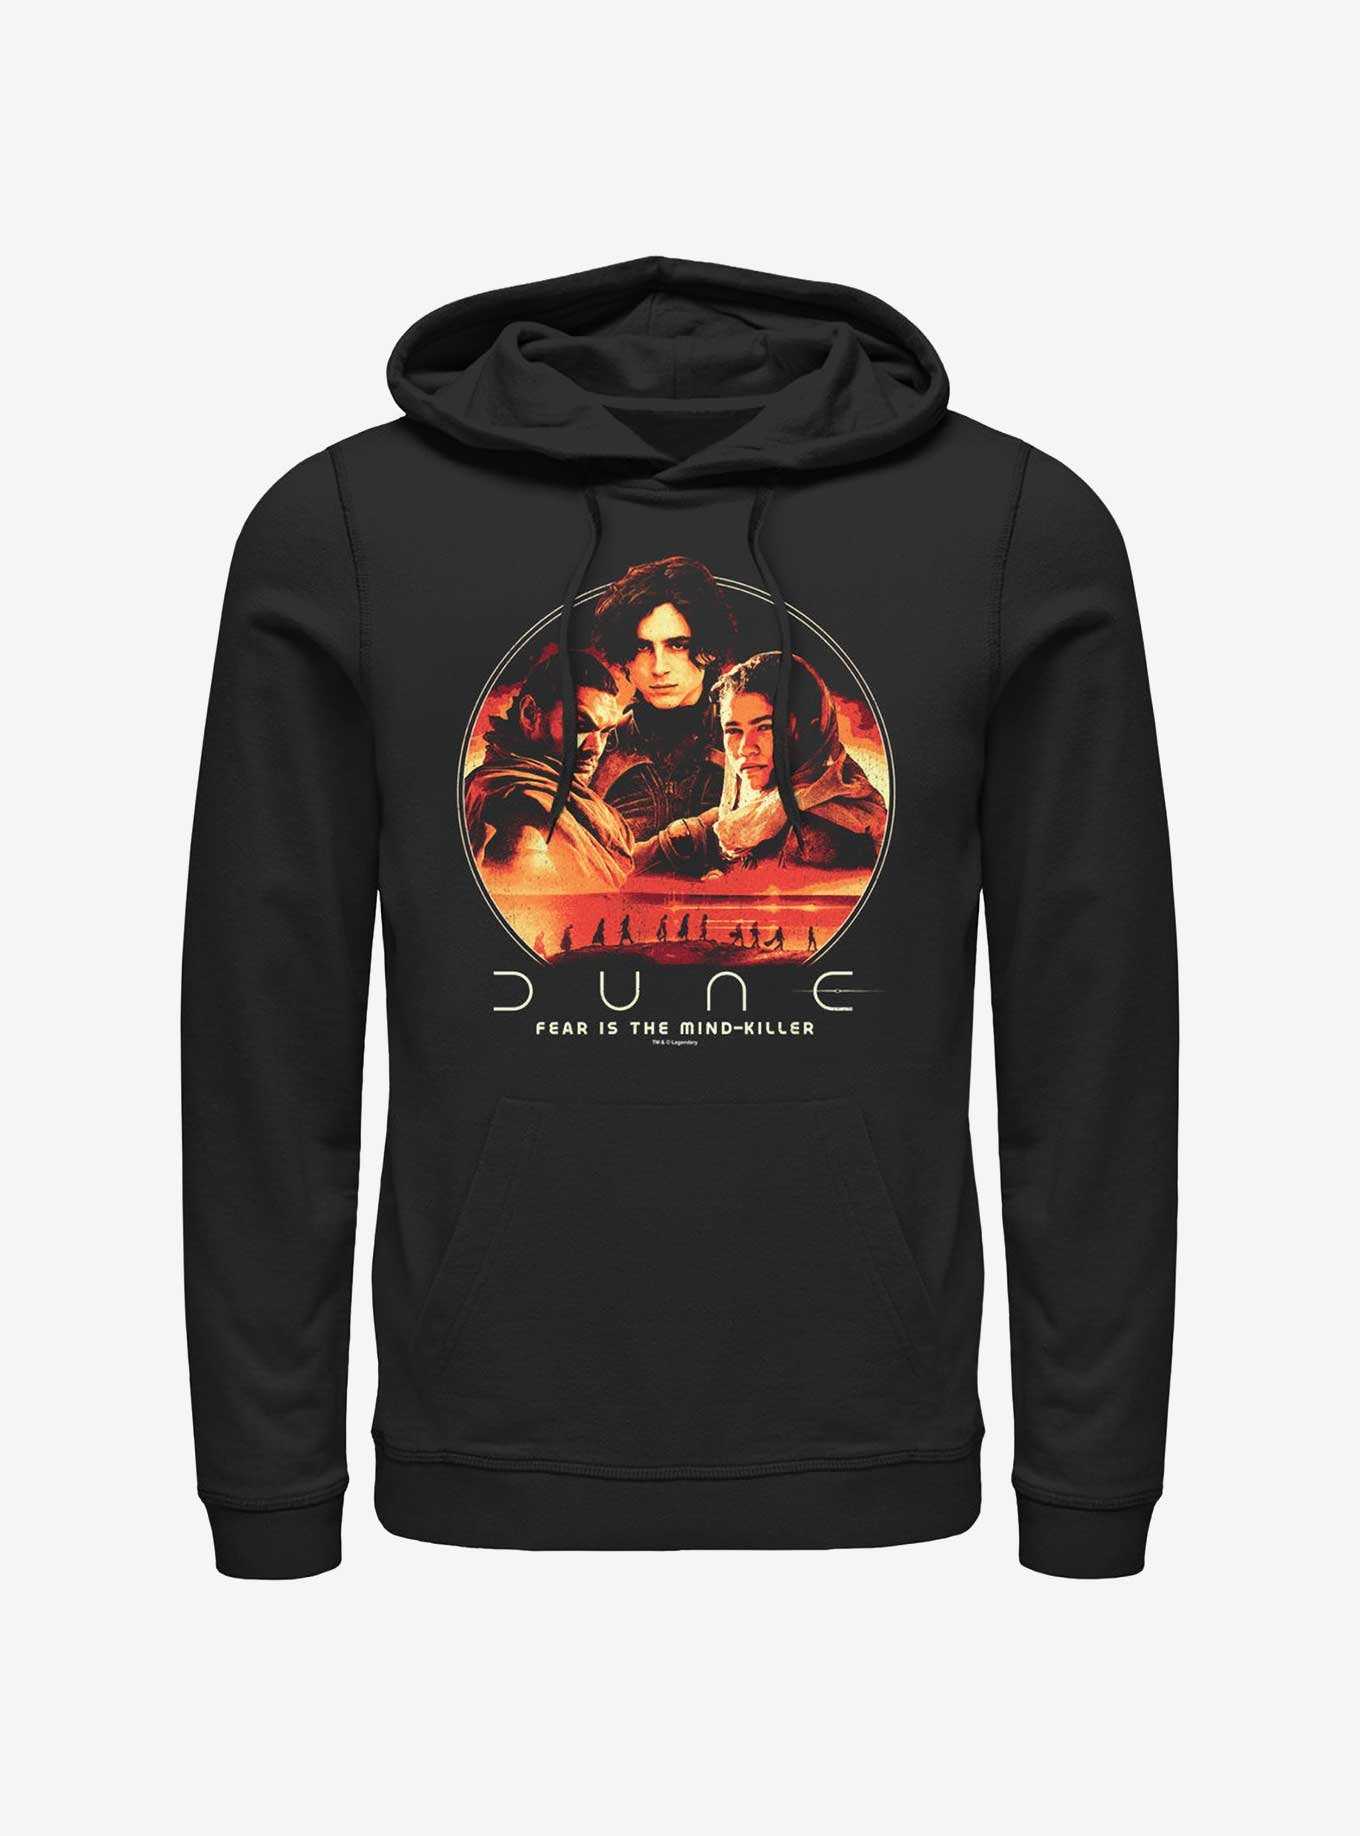 Dune: Part Two Characters Circle Icon Hoodie, , hi-res